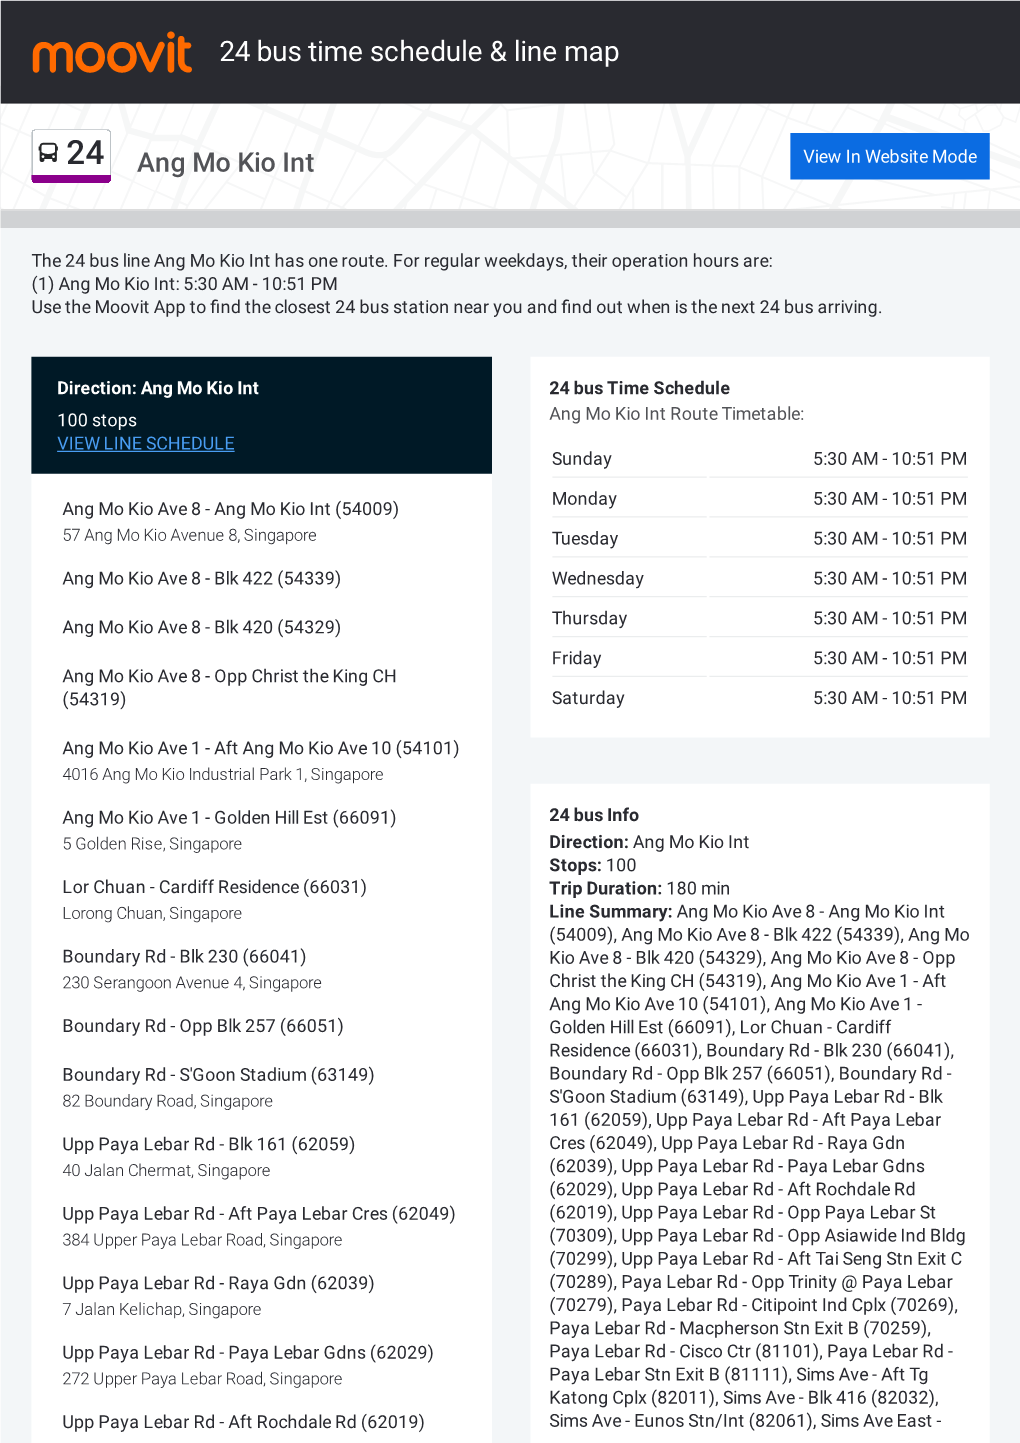 24 Bus Time Schedule & Line Route